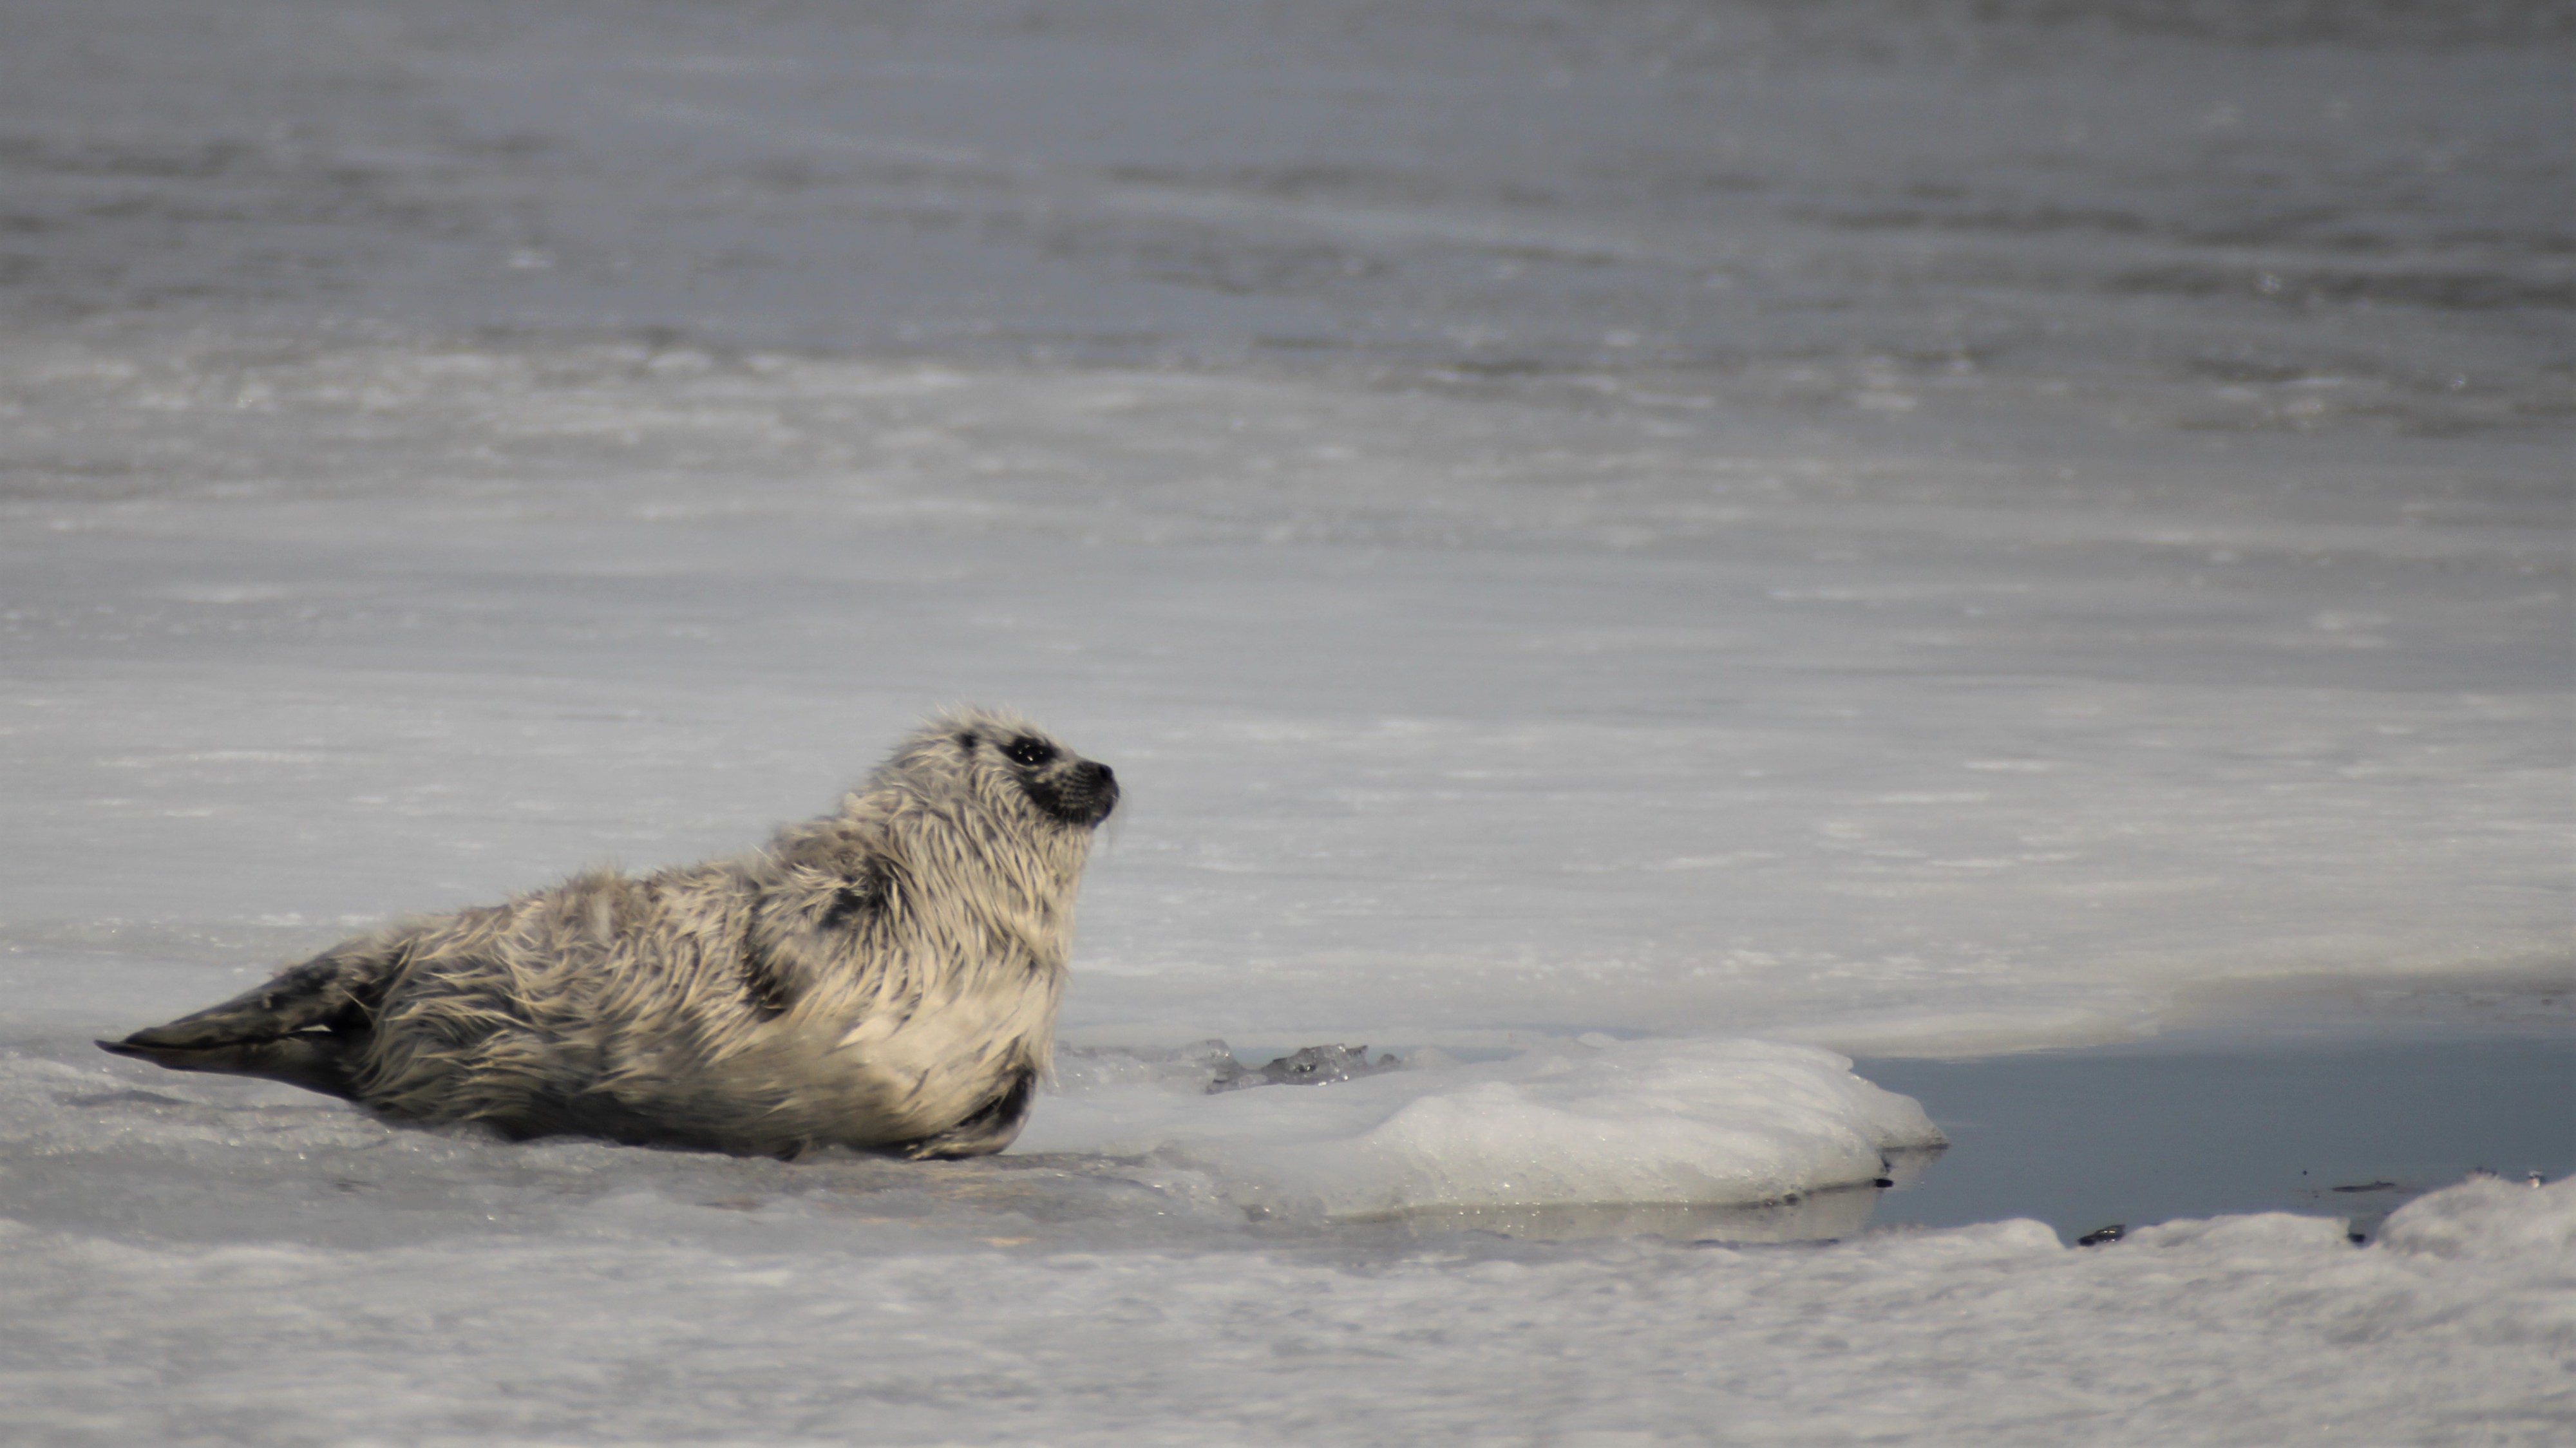 NGOs are working to tighten fishing rules to protect endangered Saimaa seals